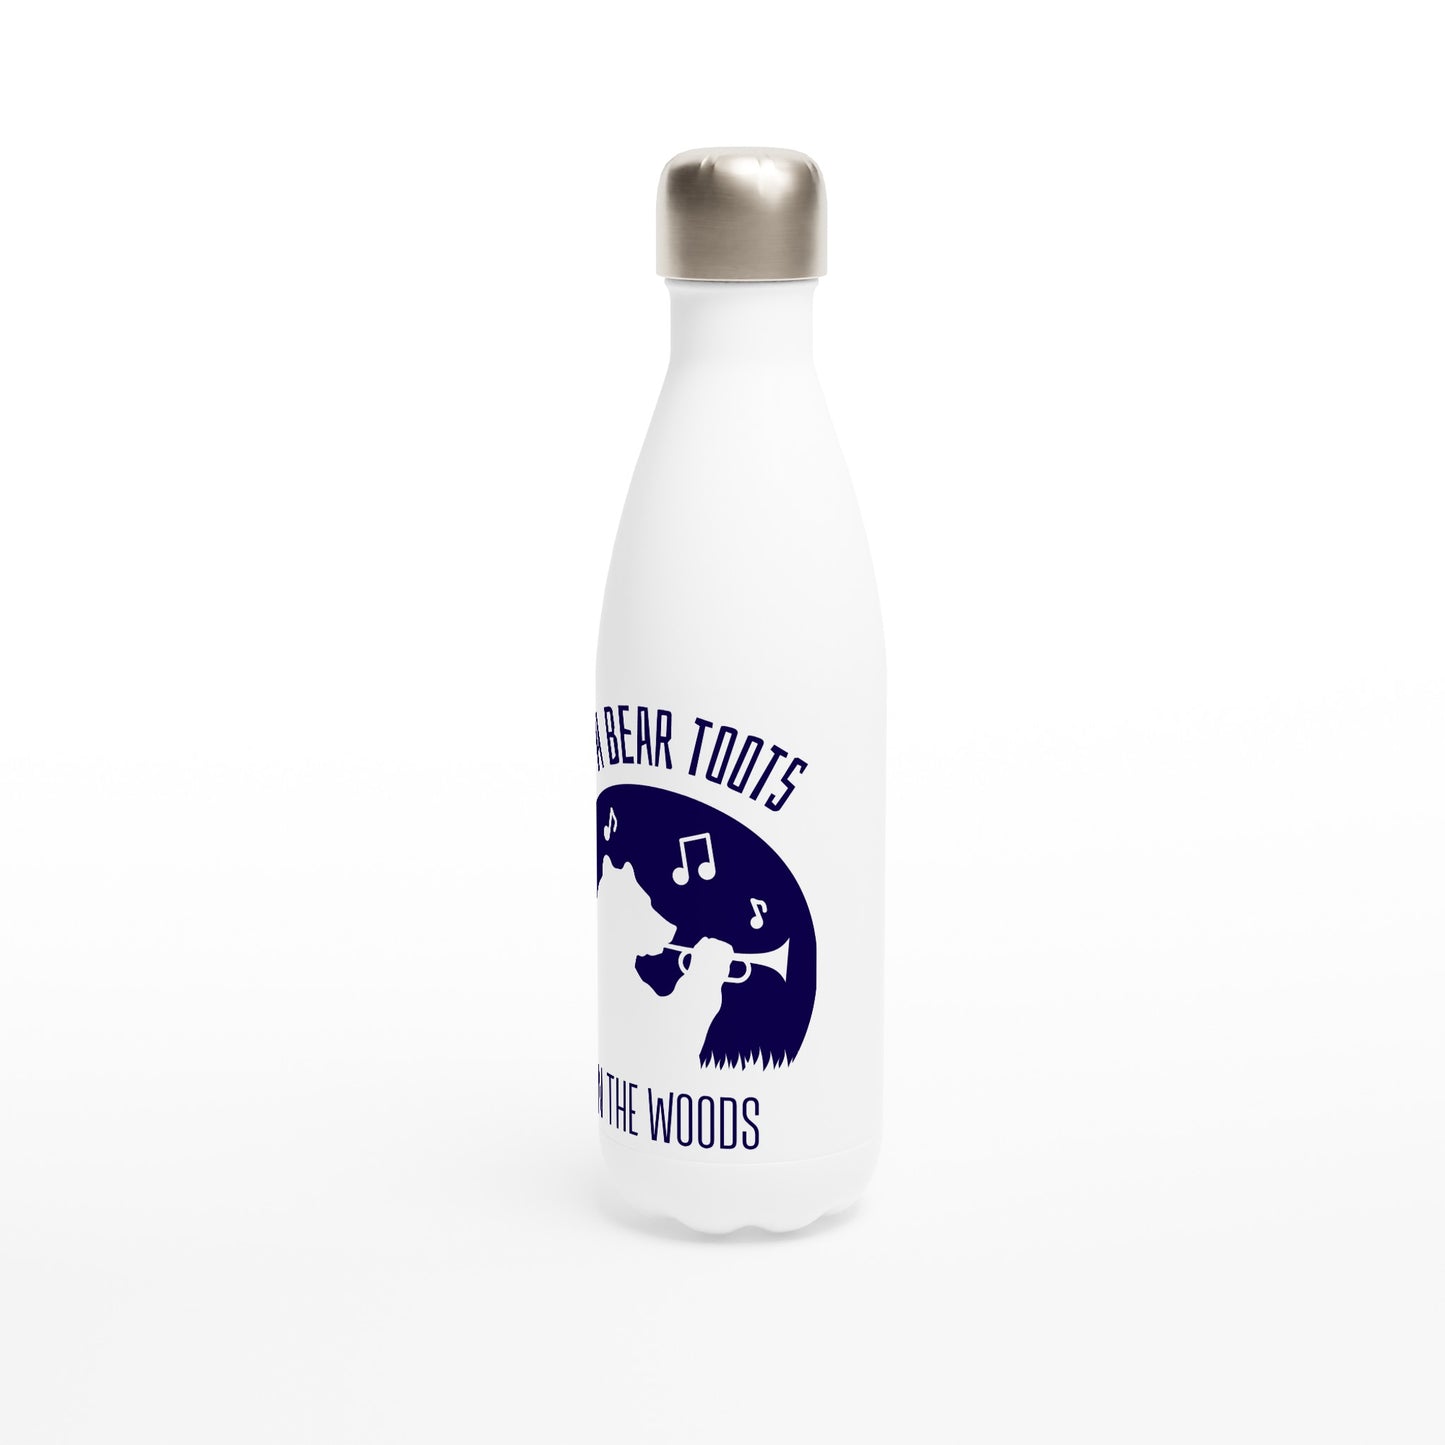 If A Bear Toots In The Woods, Trumpet Player - White 17oz Stainless Steel Water Bottle White Water Bottle animal Funny Music